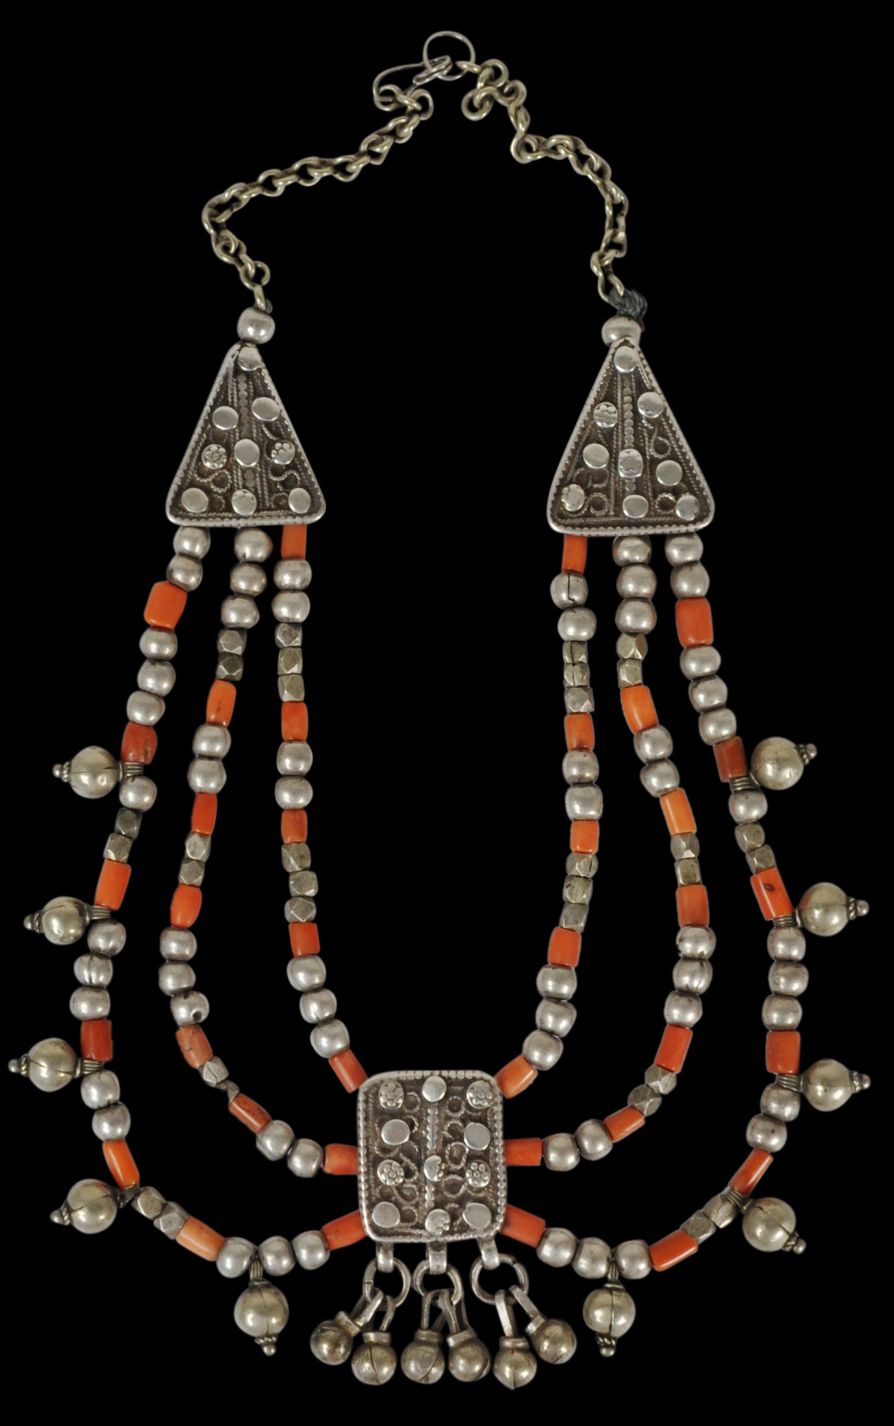 Yemeni Silver and Coral Bead Necklace - Michael Backman Ltd